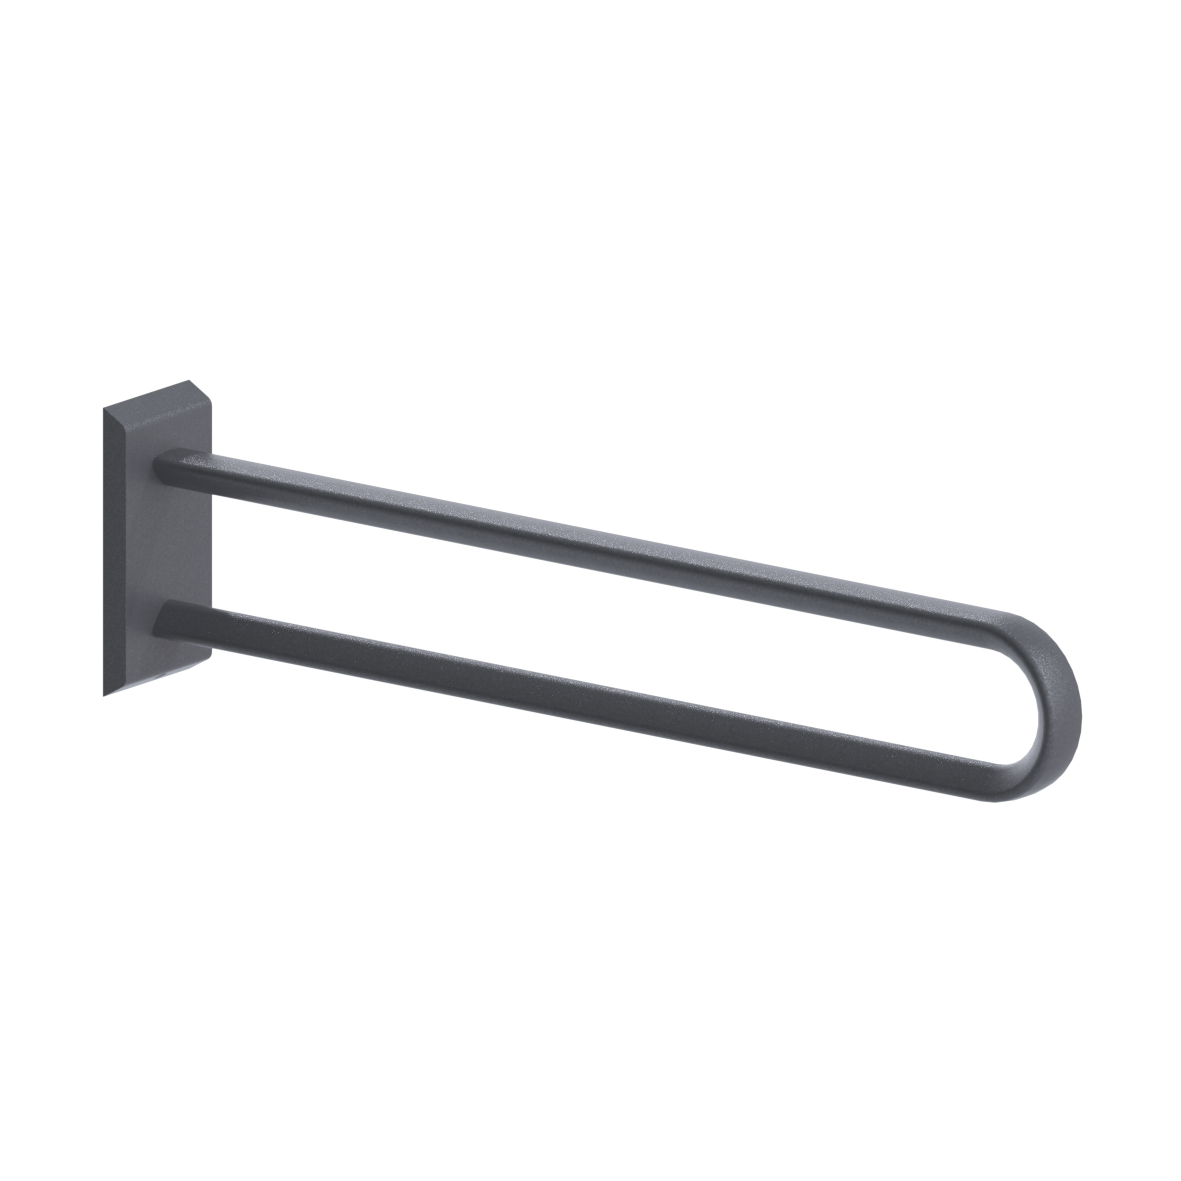 Cavere Care Wall support rail vario, with base plate, L = 850 mm, Cavere Metallic anthracite